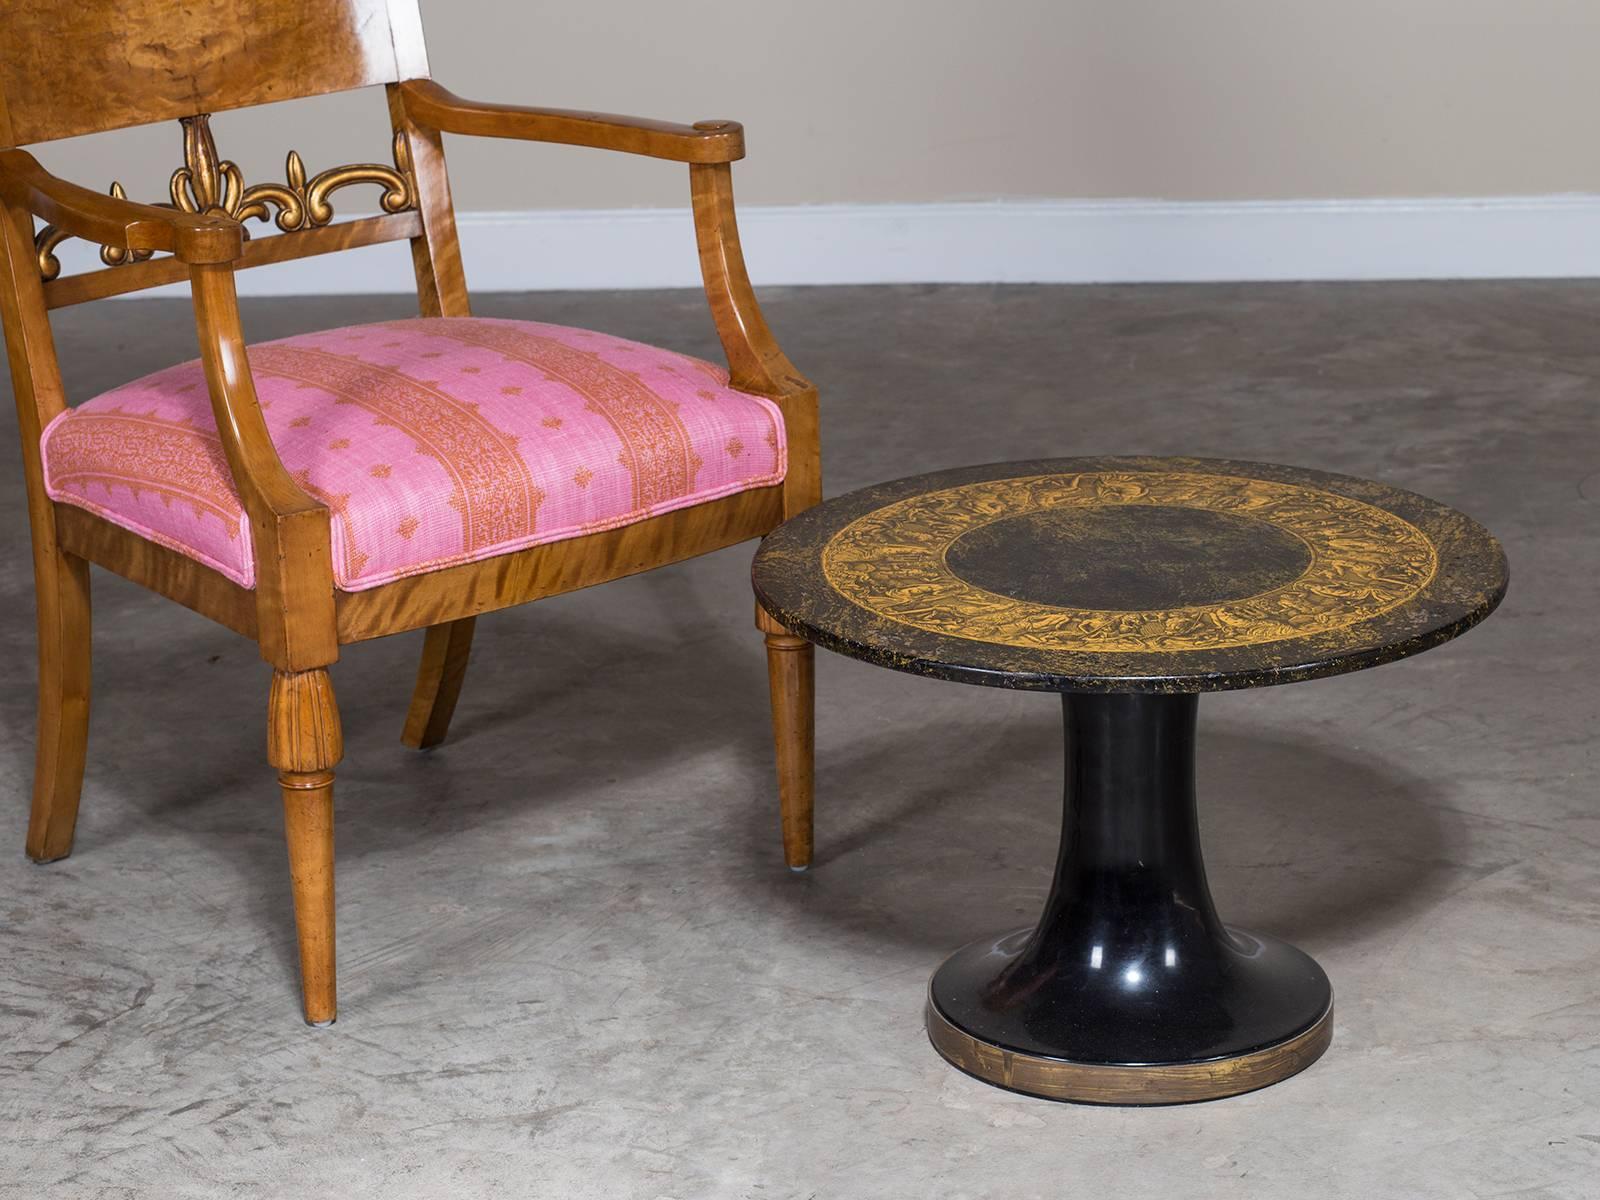 Receive our new selections direct from 1stdibs by email each week. Please click Follow Dealer below and see them first!

This original Piero Fornasetti table is Italian, circa 1960 and bears the distinctive label on the underside of the top.